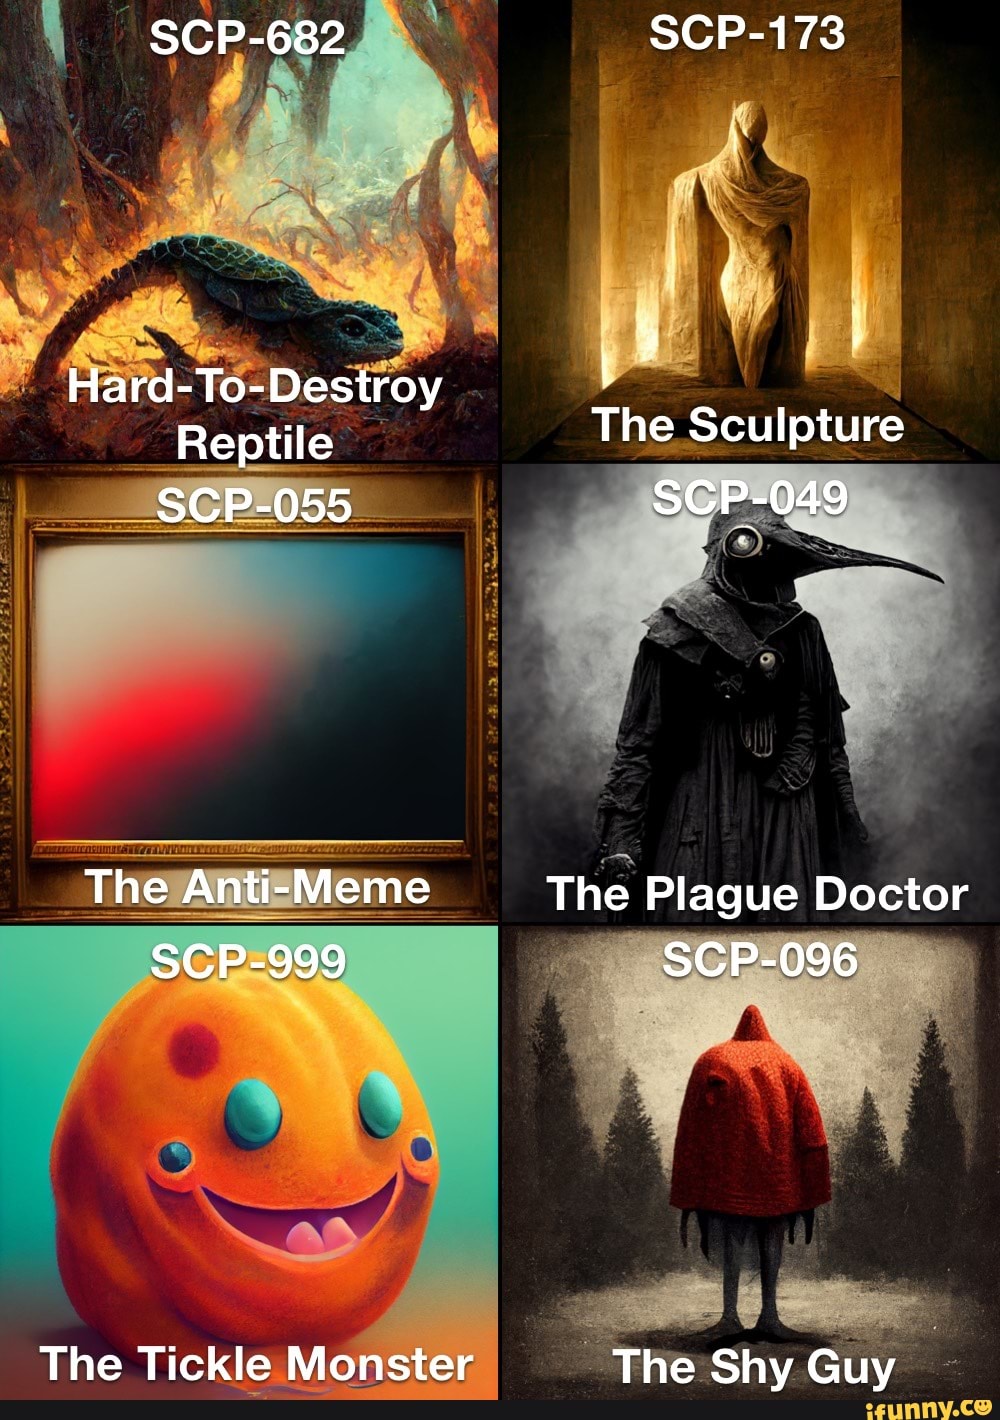 SCP-682 Hard-To-Destroy Reptile SCP-055 The Anti-Meme SCP-999 The